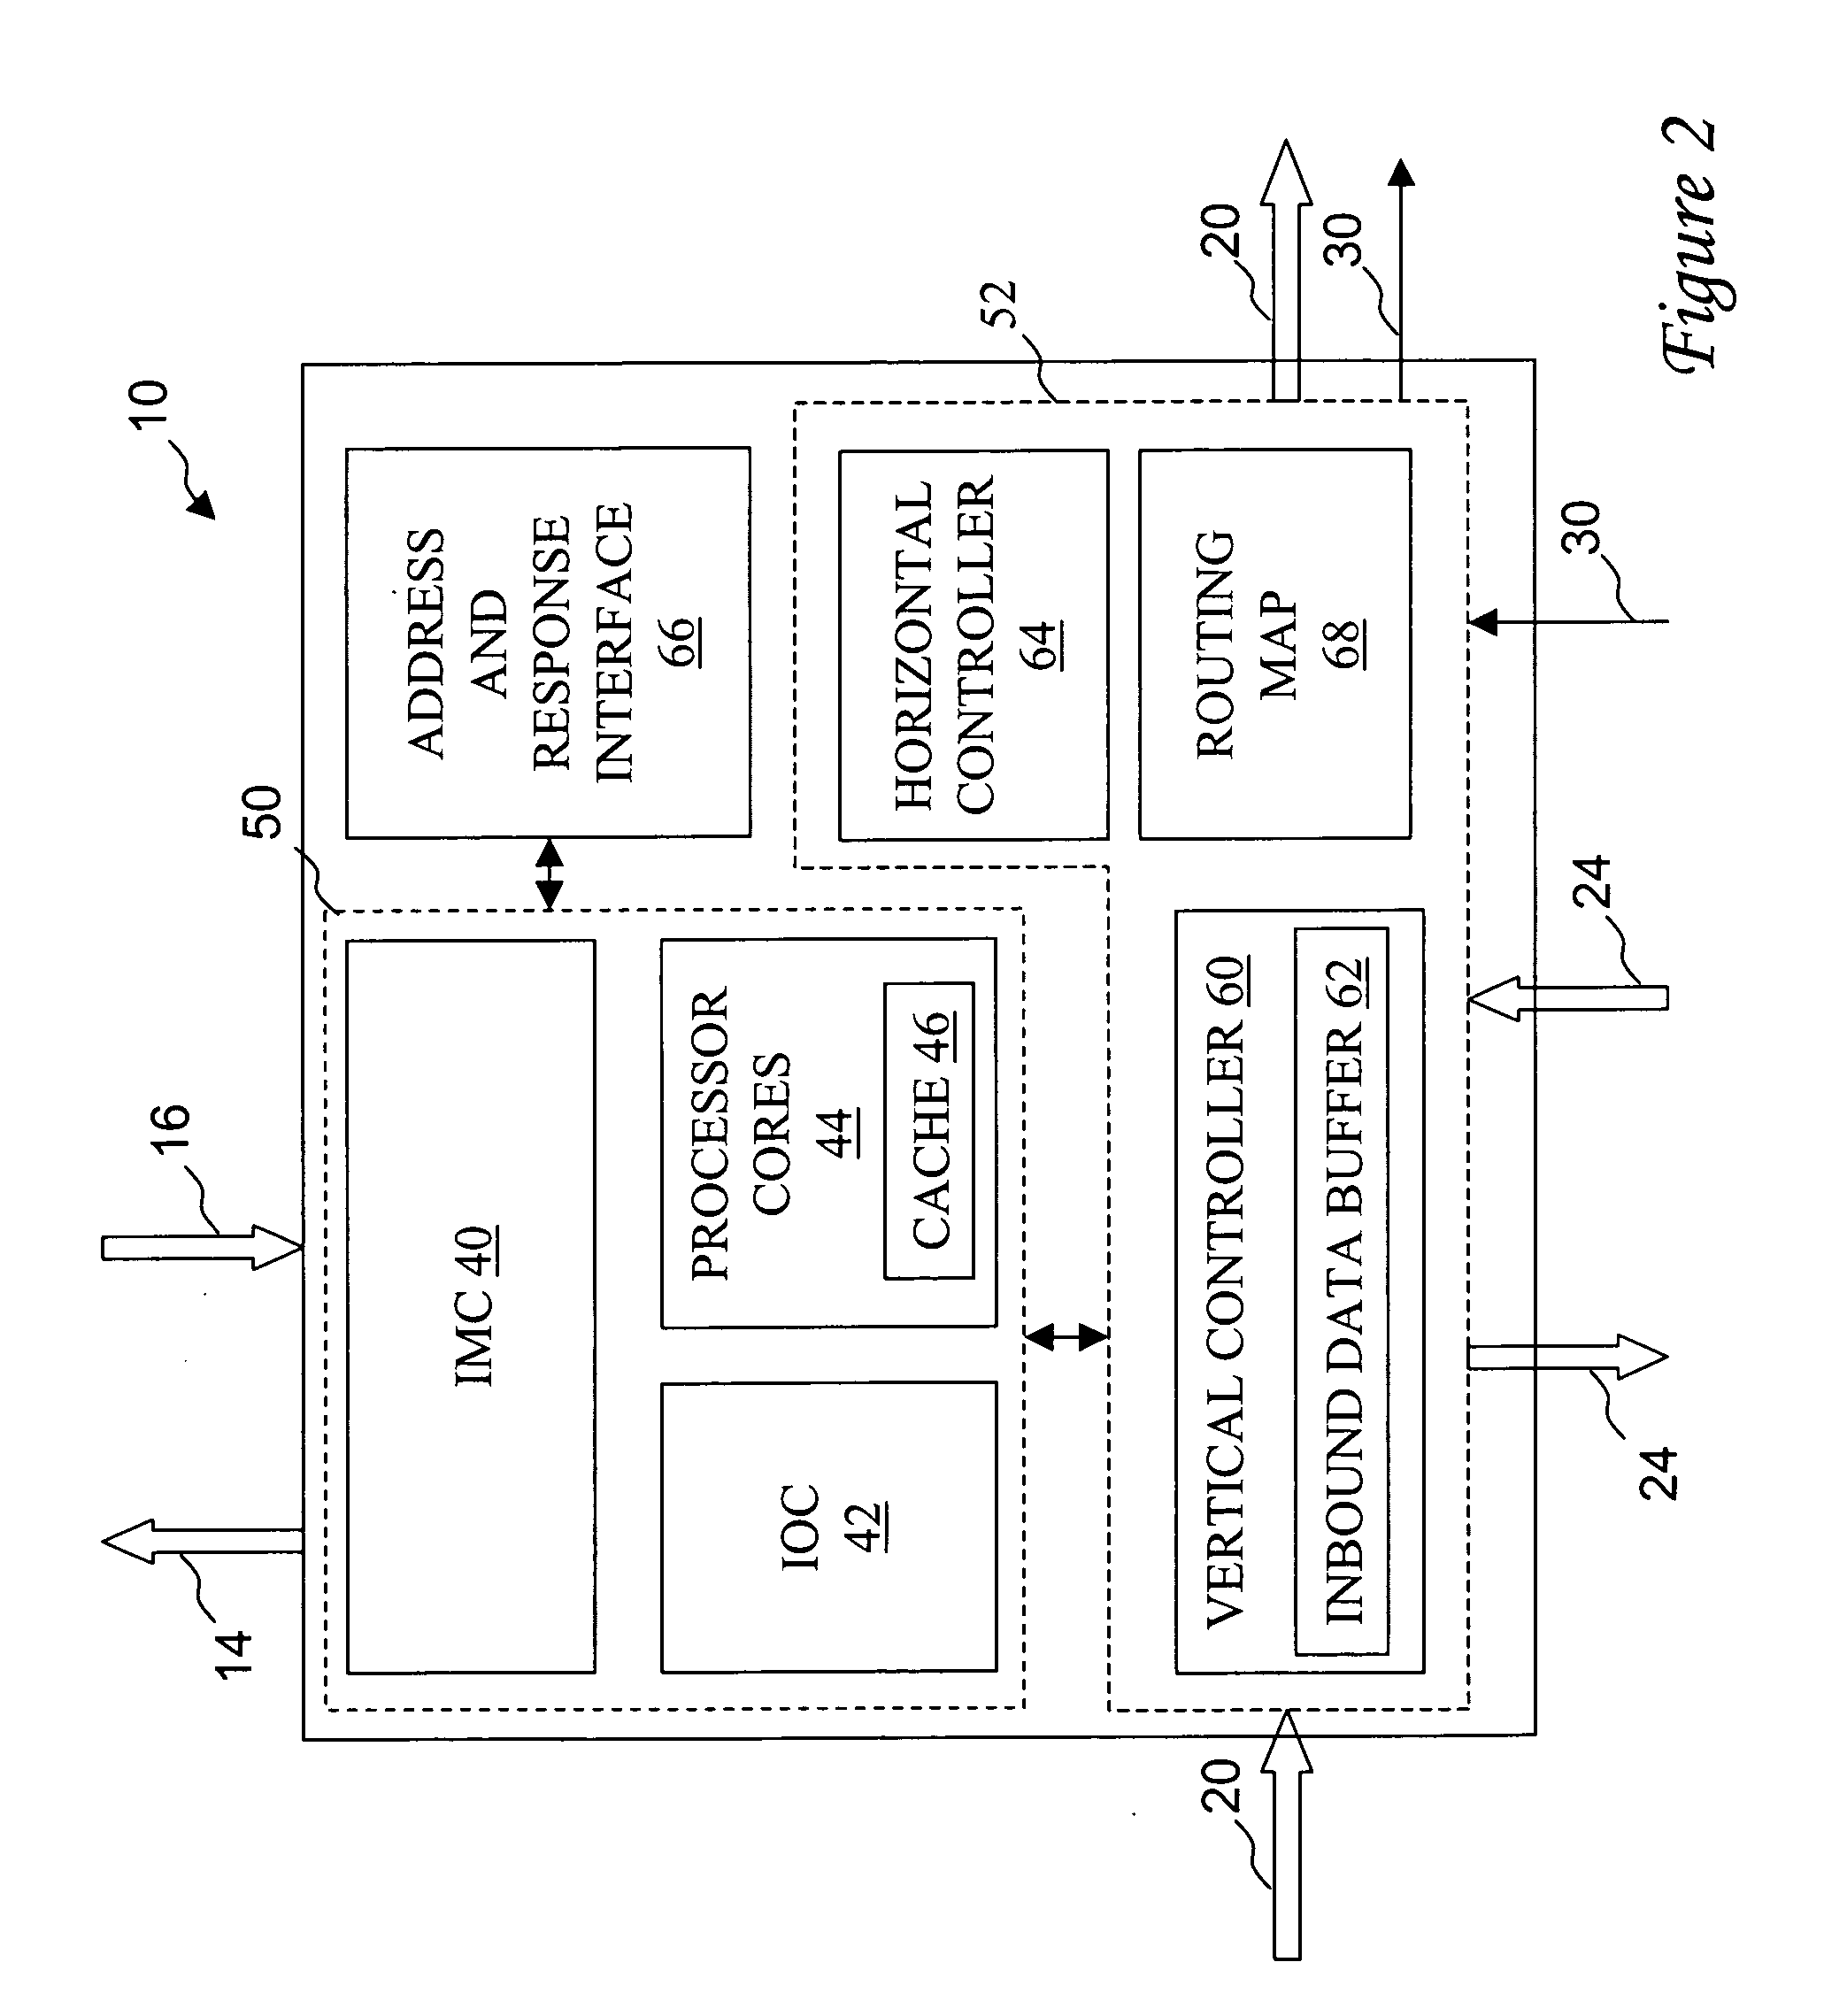 Multiprocessor data processing system having a data routing mechanism regulated through control communication